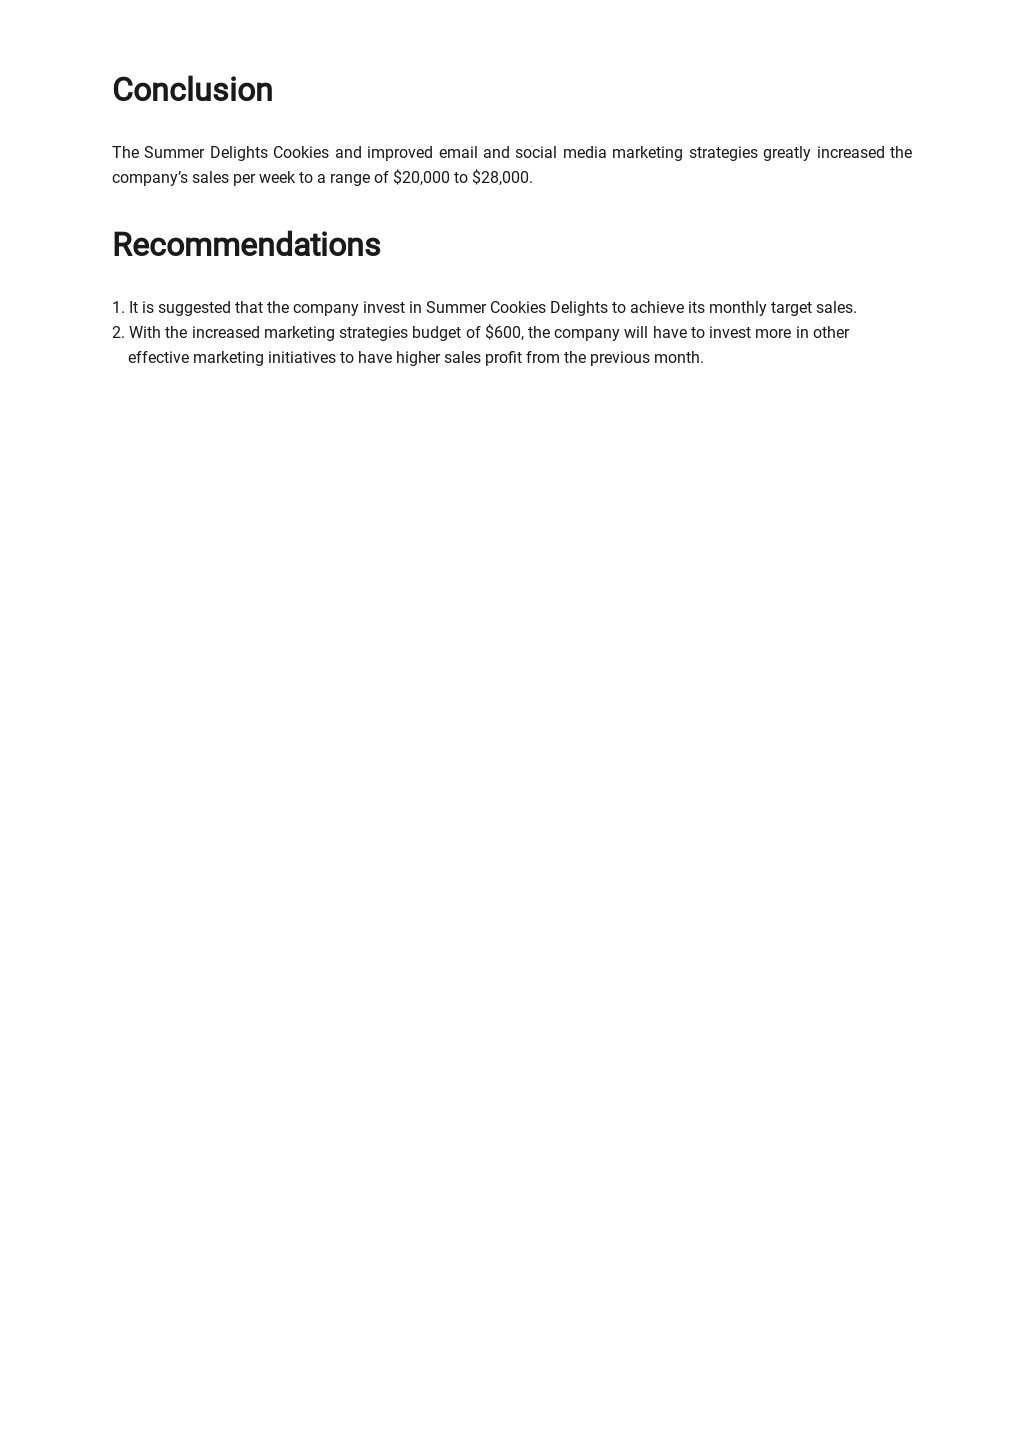 Strategic Analysis Report Template [Free PDF] - Word | Apple Pages ...